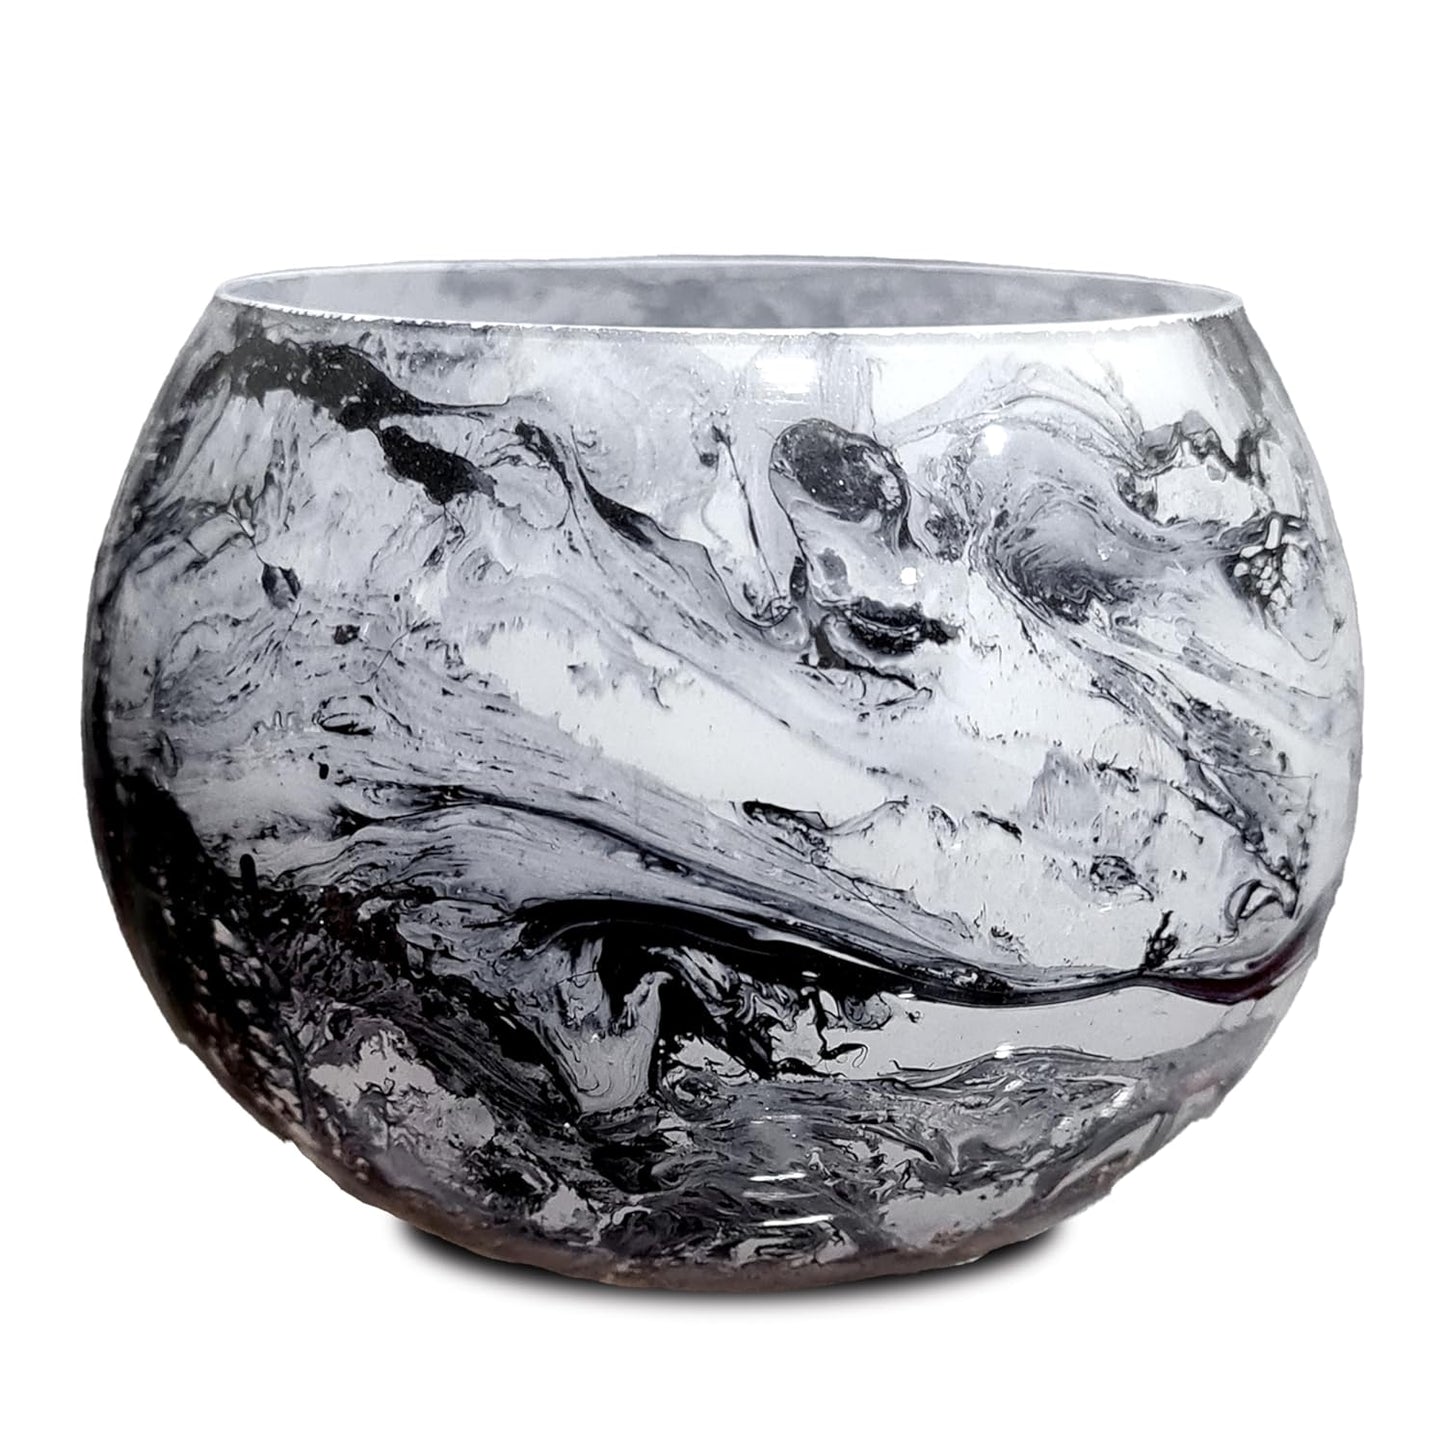 A black and white marble bowl with a unique pattern.